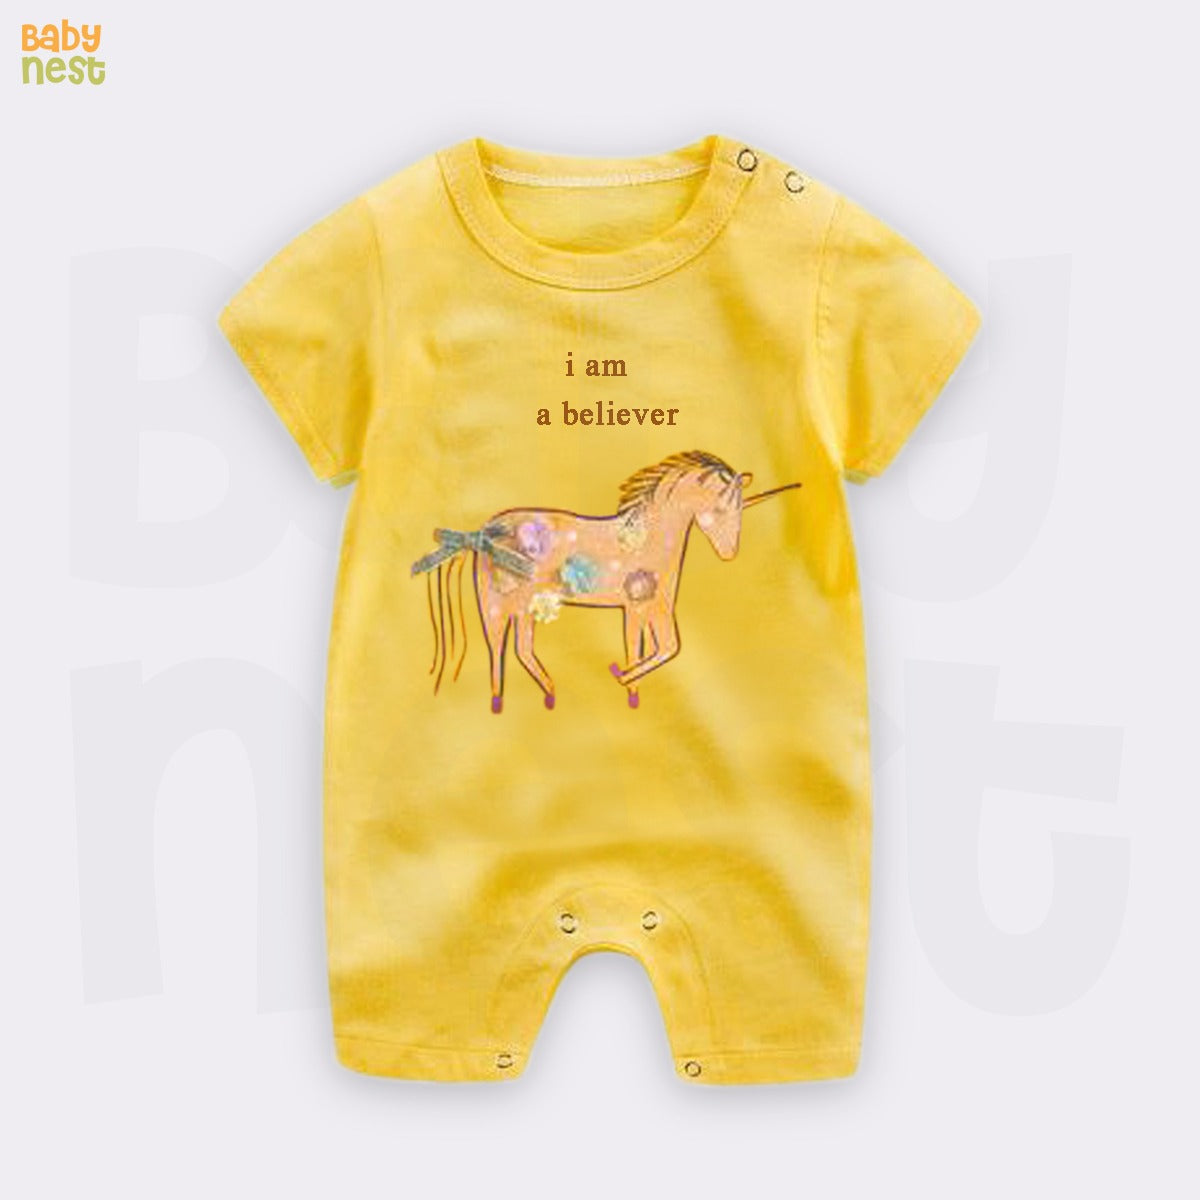 Baby Half Romper - I am a Believer - Yellow